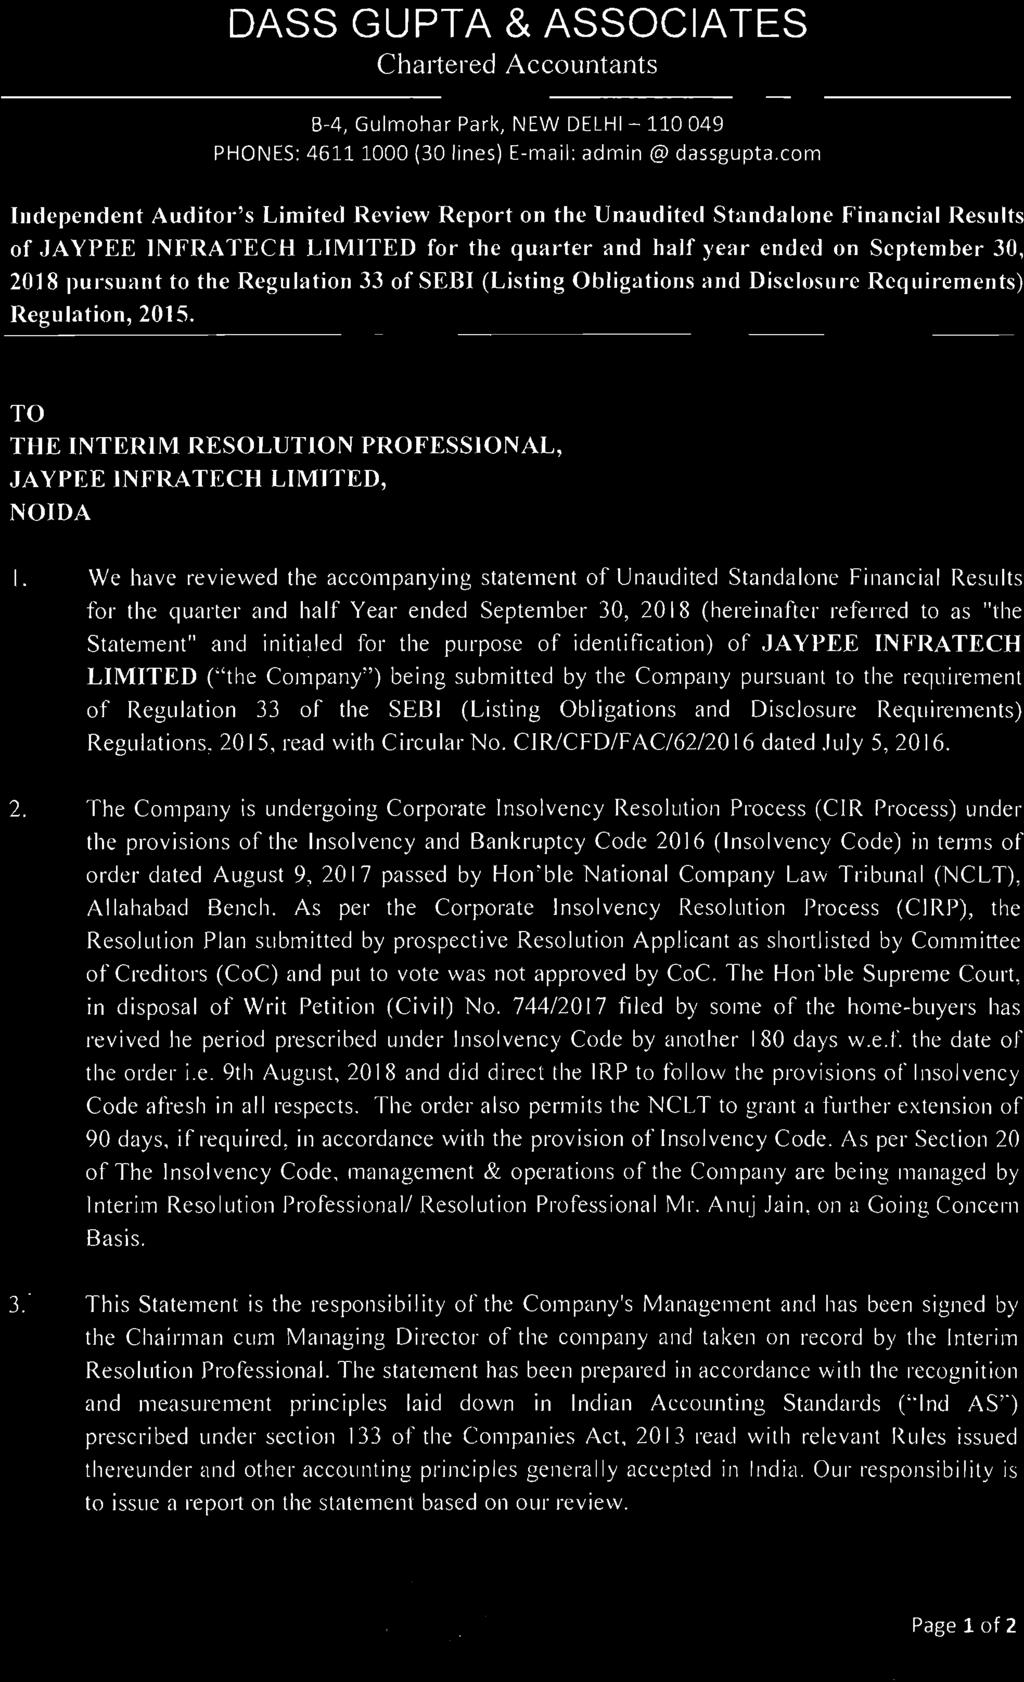 Regulation ofsebi (Listing Obligations and Disclosu."e Requirements) Regulation 2015. TO THE INTERIM RESOLUTION PROFESSIONAL JA YPEE INFRA TECH LIMITED NOIDA I.